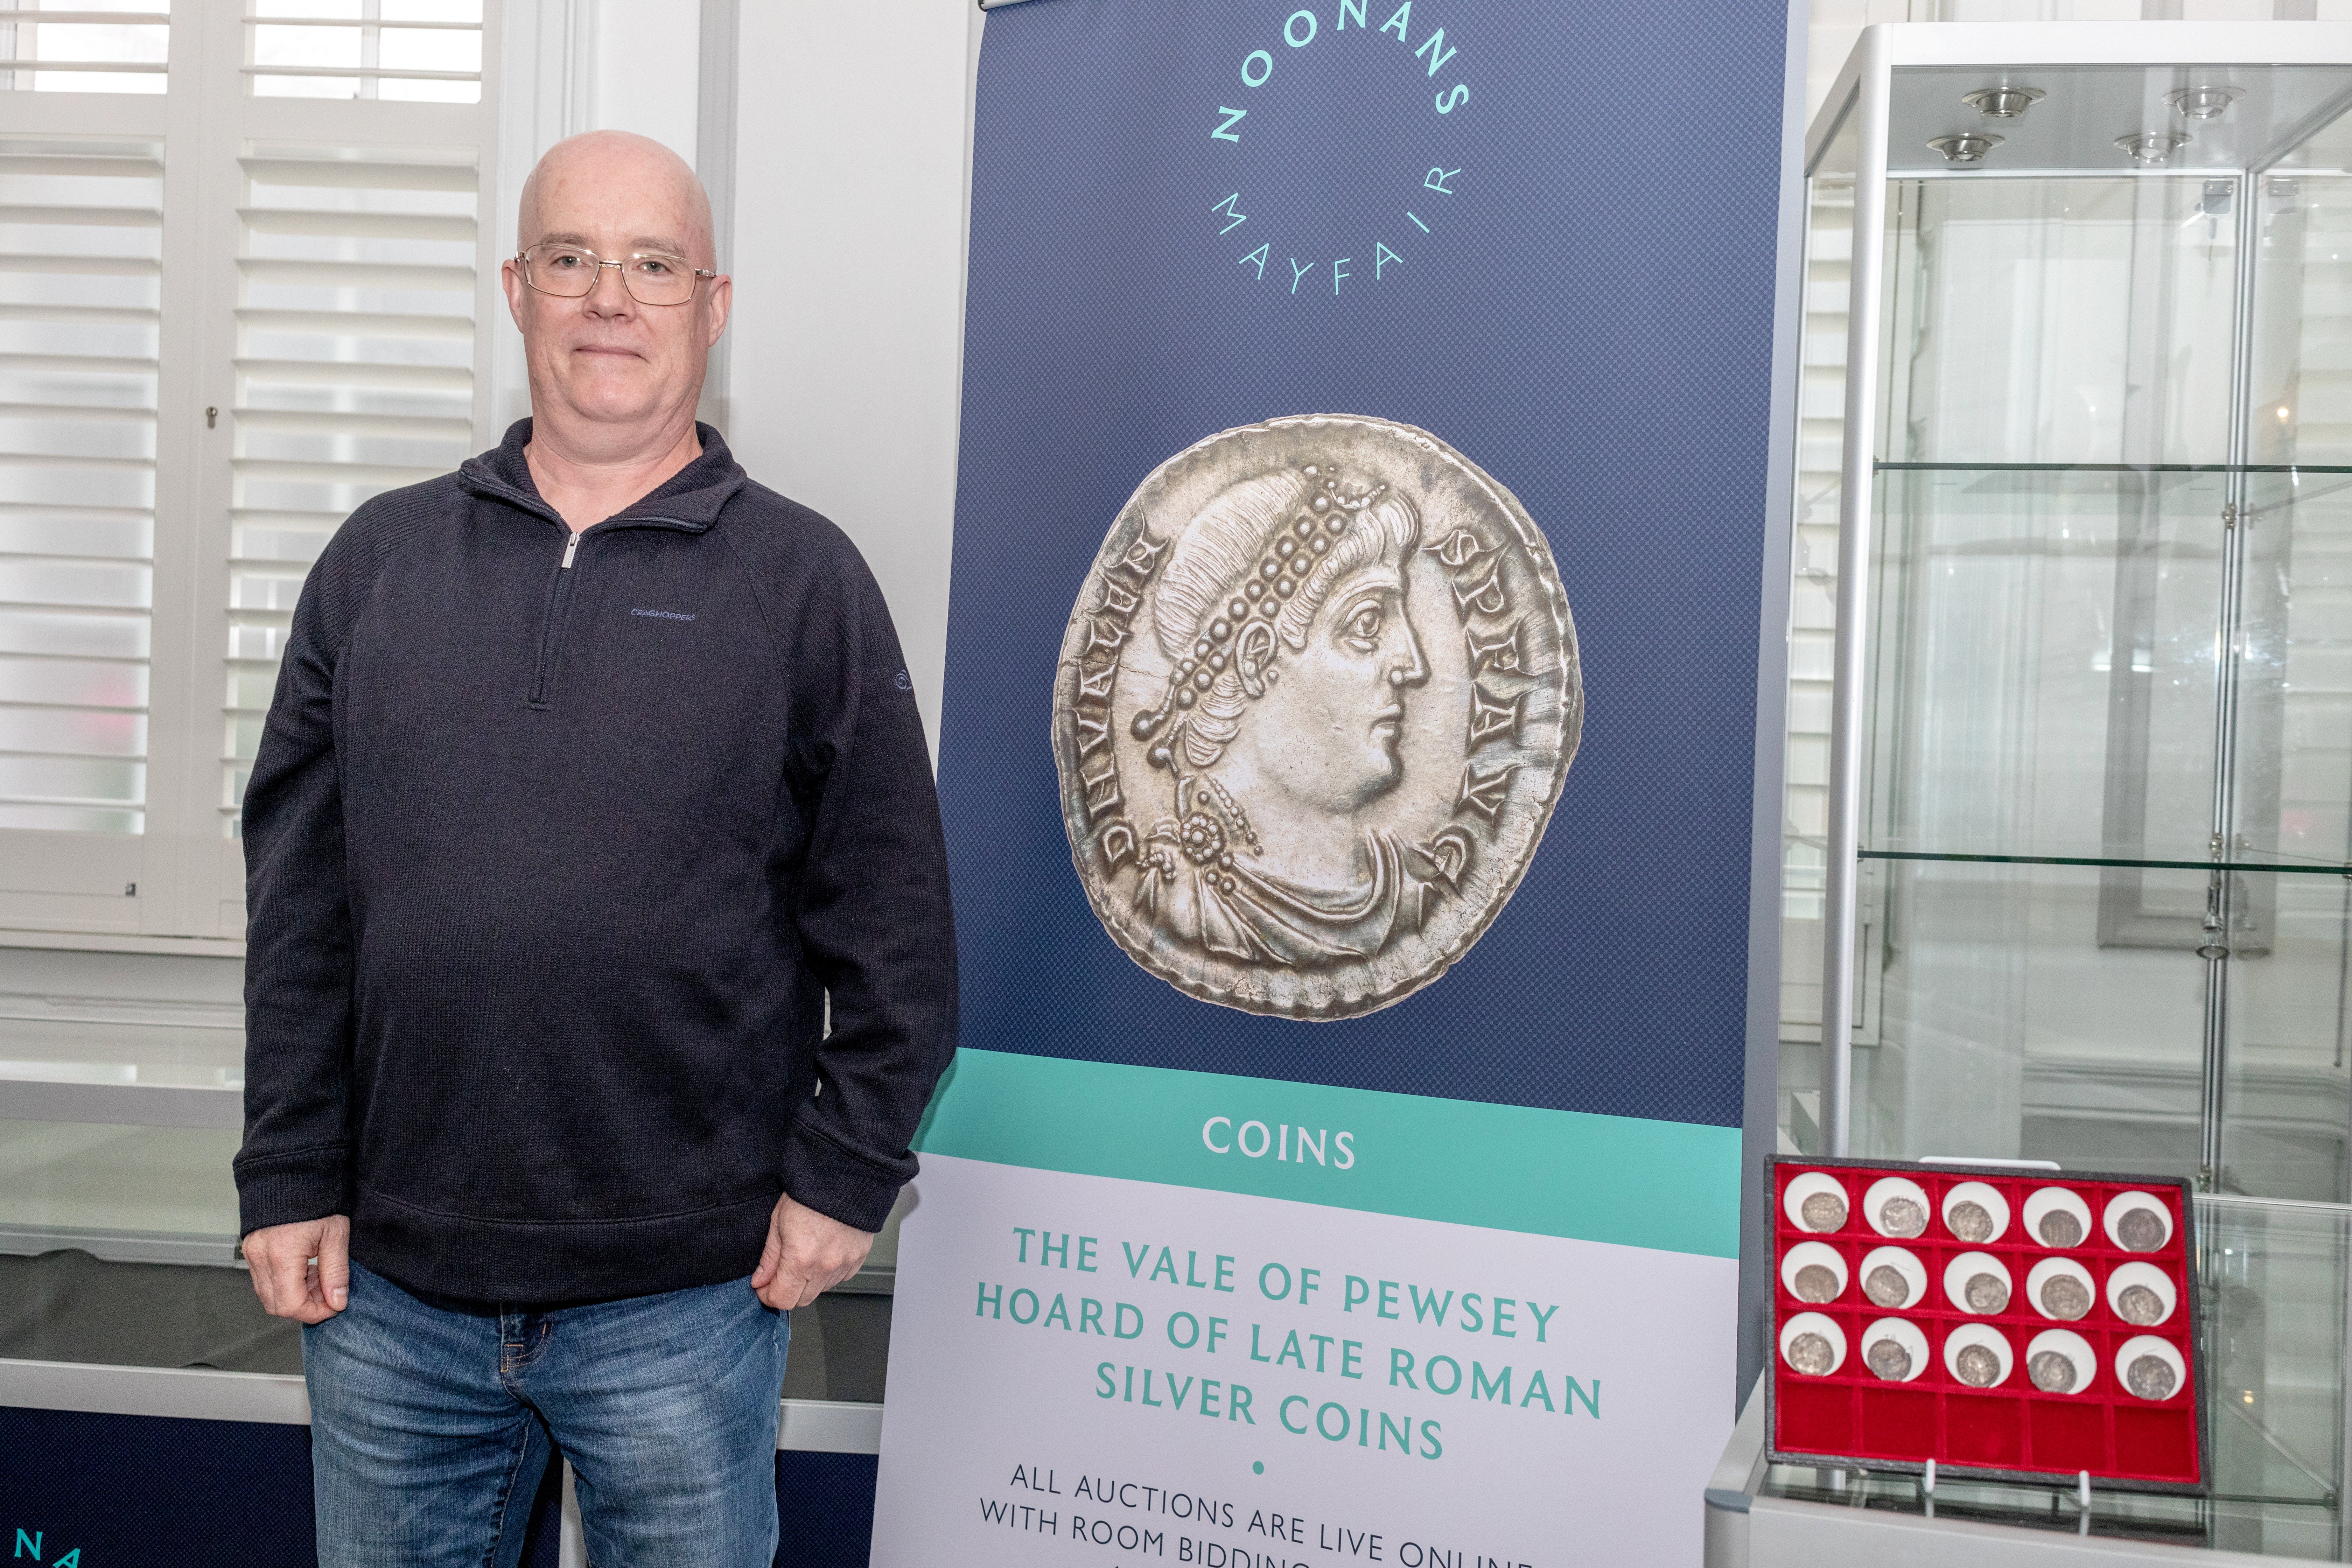 Dave Allen who found a hoard of roman coins in Pewsey Vale, Wiltshire